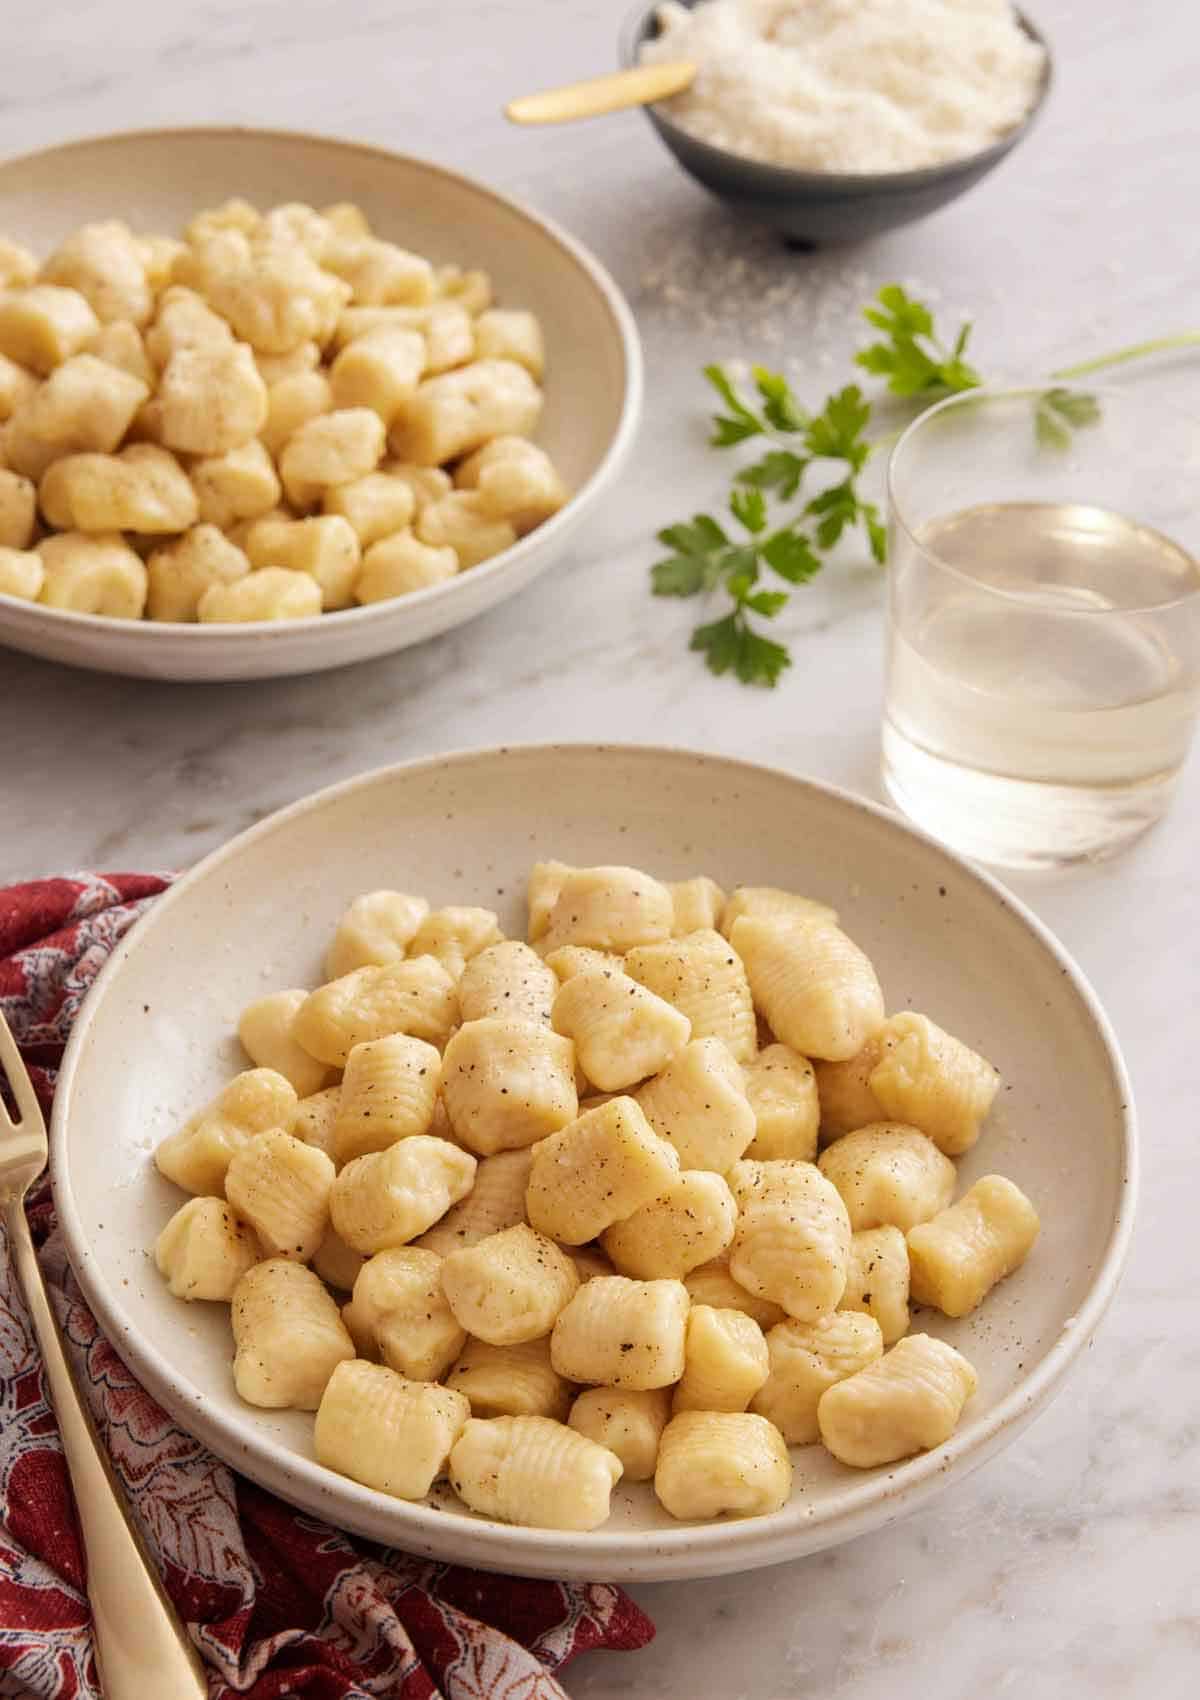 Two plates of gnocchi with a glass of wine and bowl of cheese.